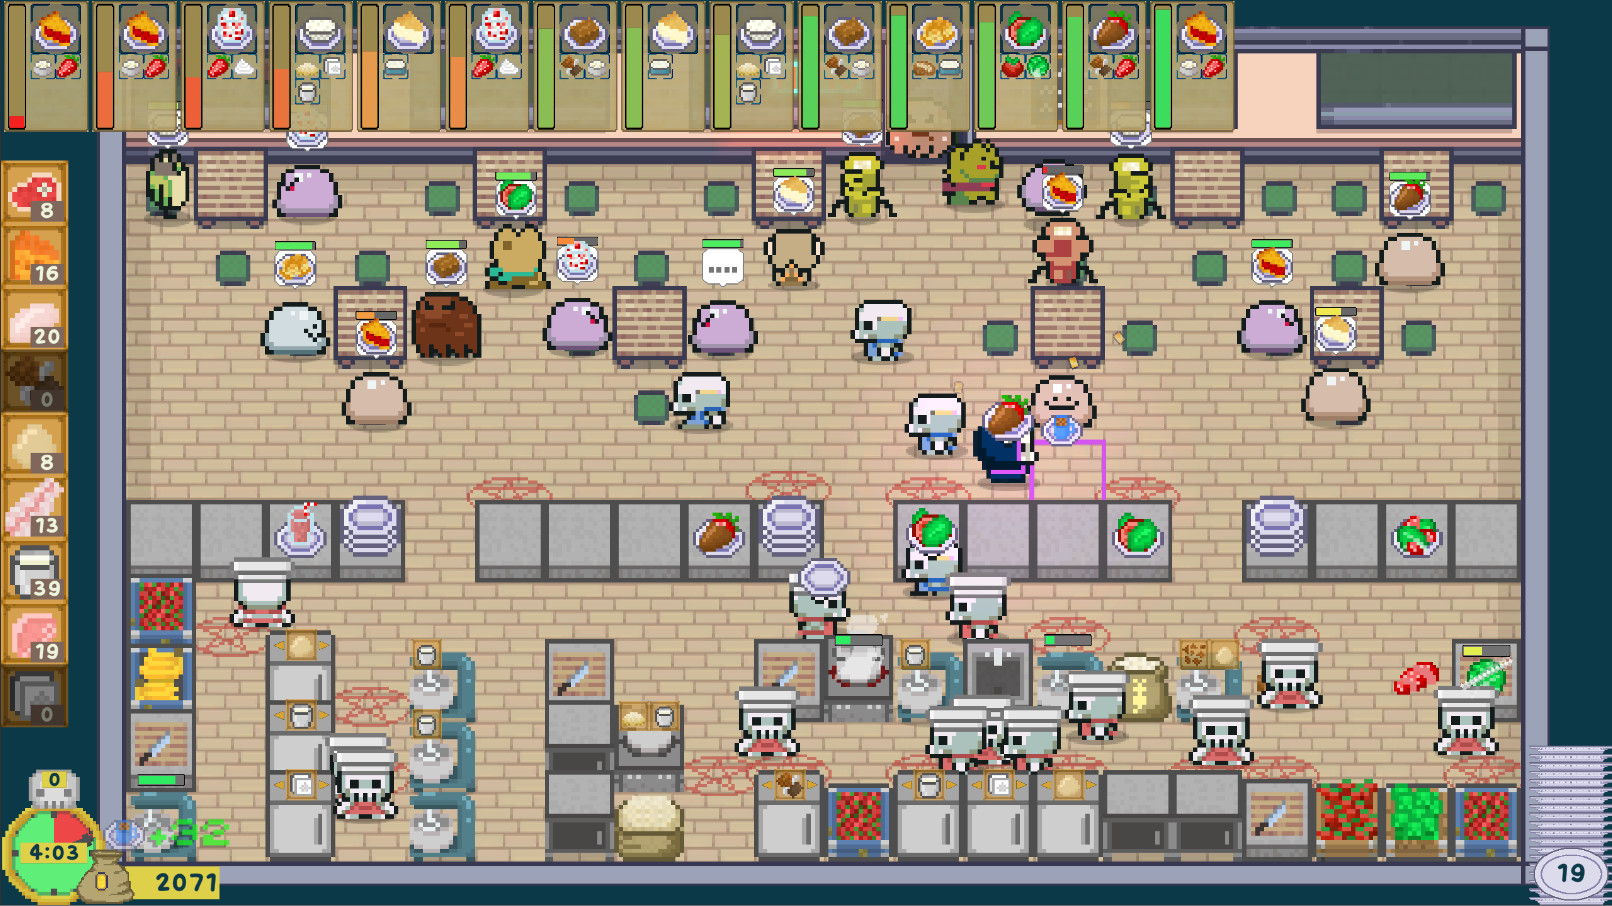 A restaurant run by skeletons and zombies in Bone's Cafe.